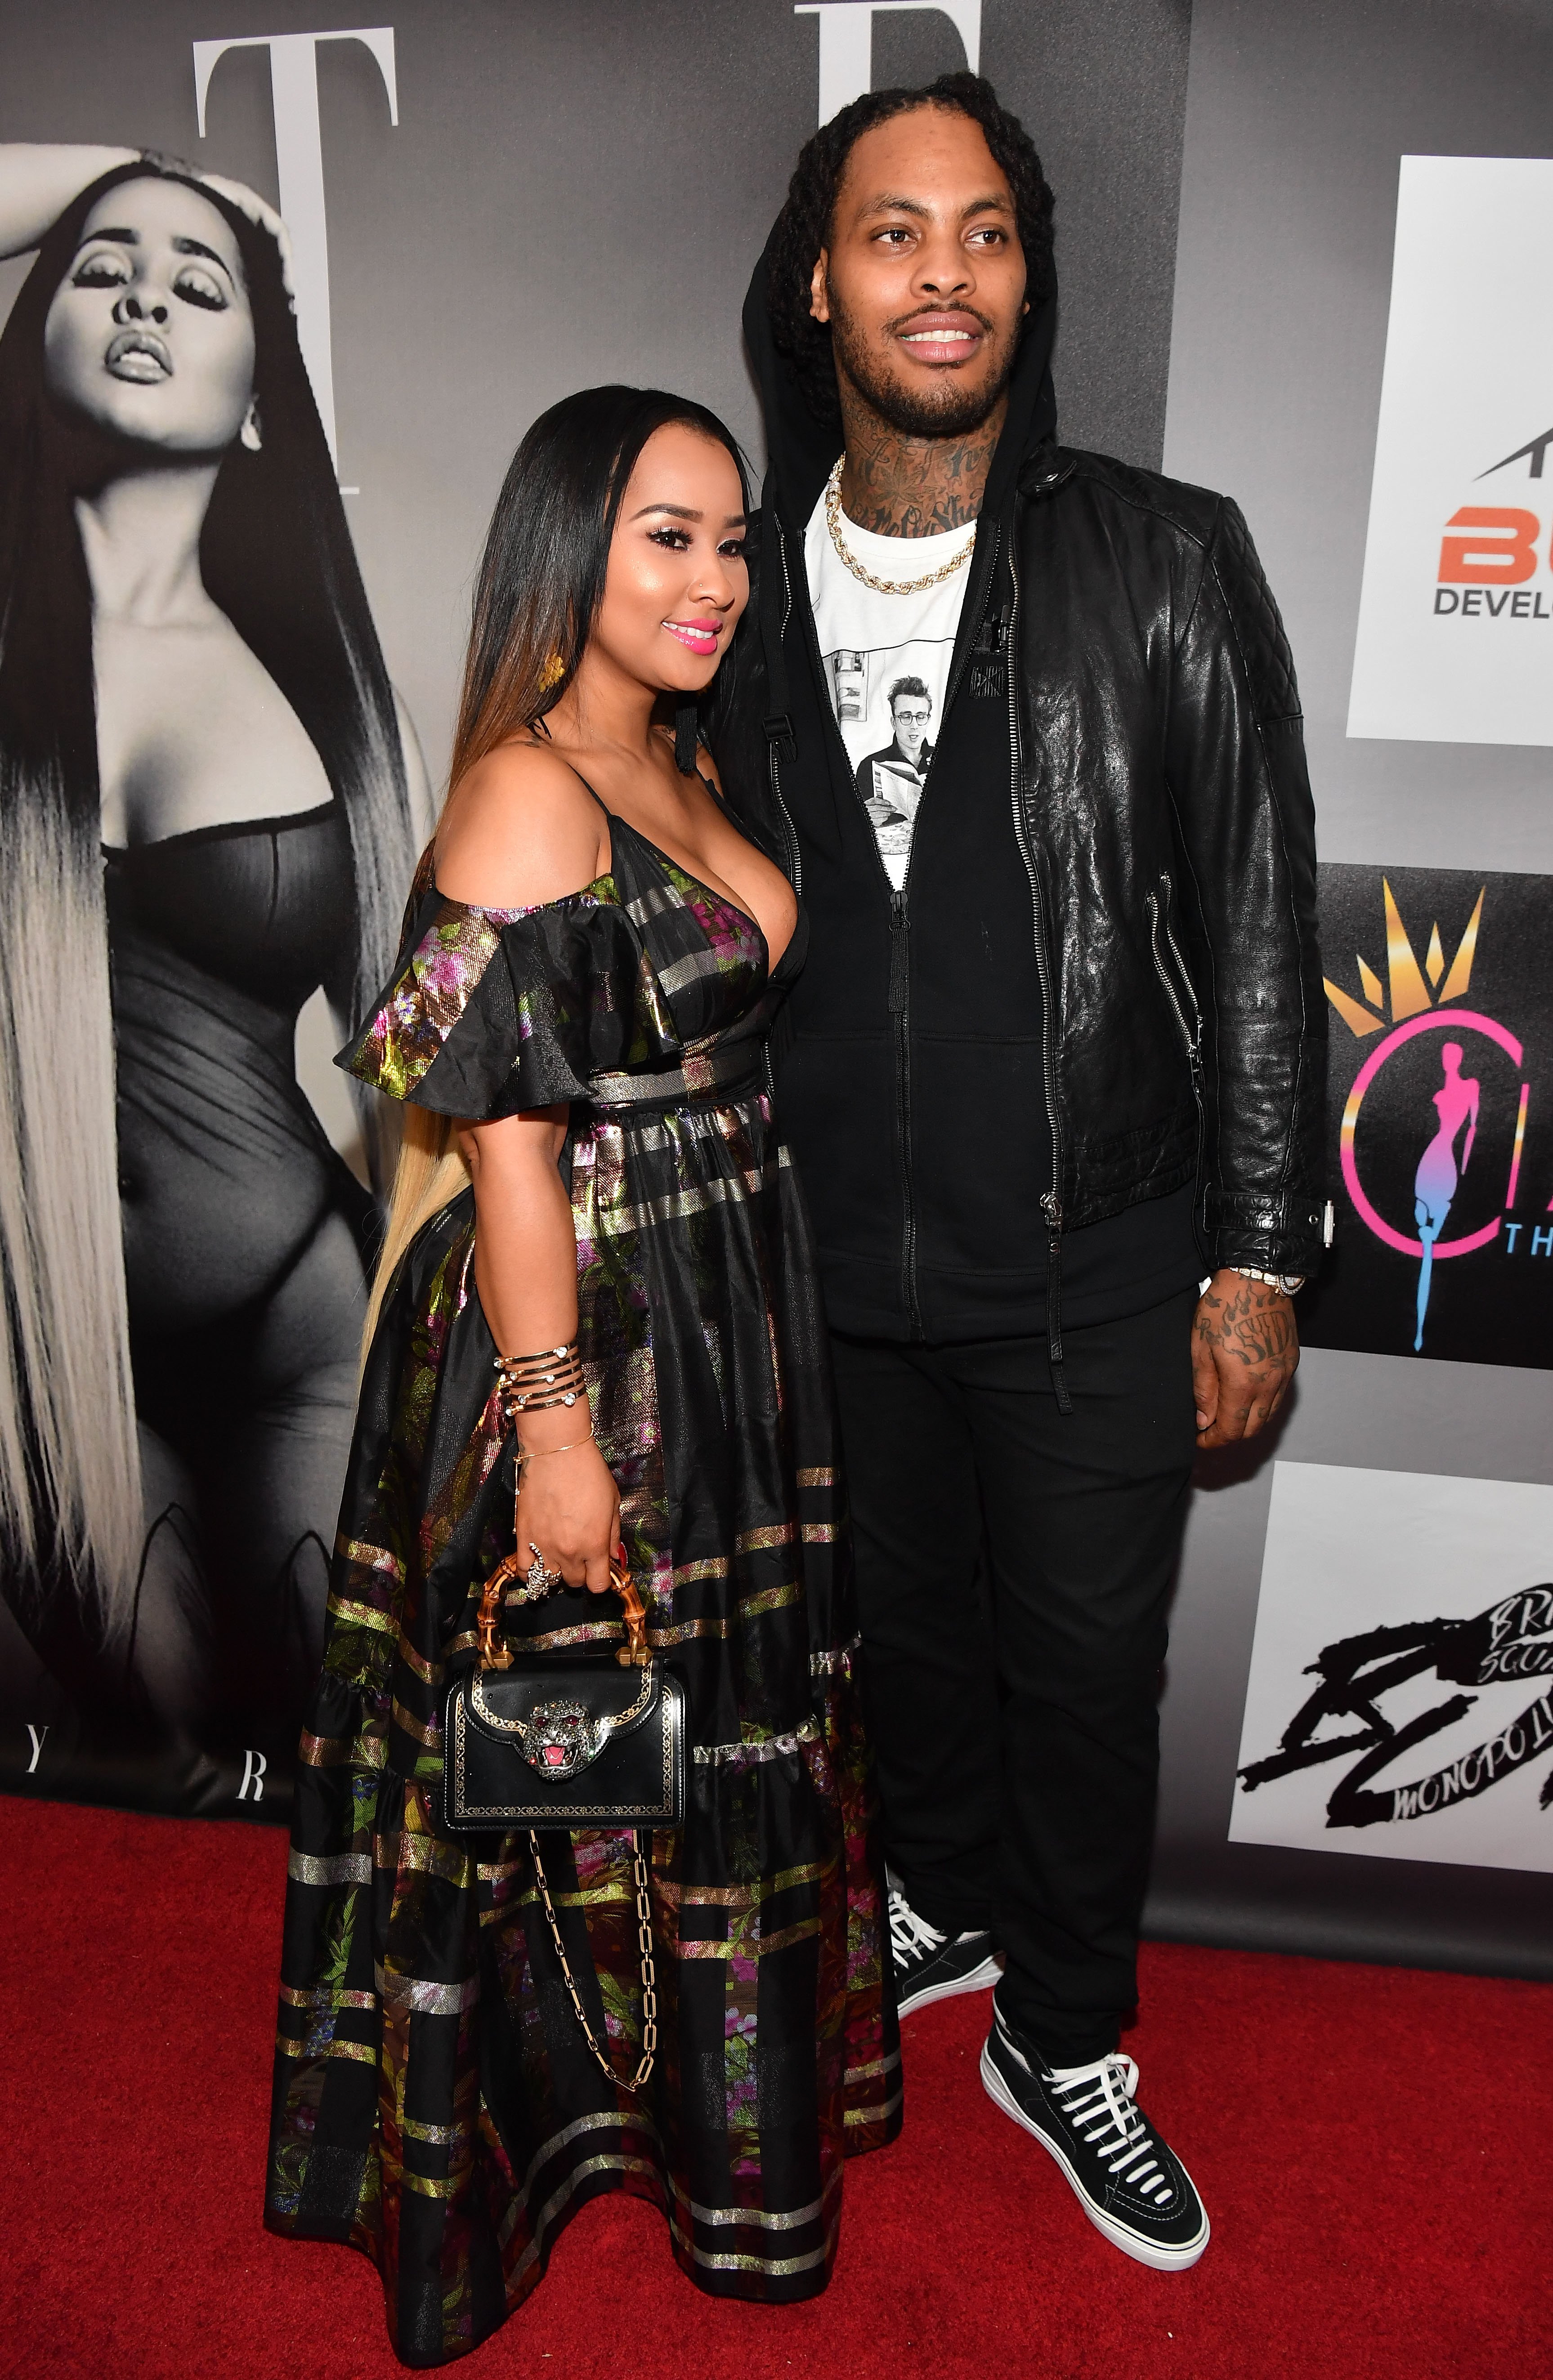 Tammy Rivera and Waka Flocka Flame at the EP Release Party of "Fate" in April 2018 | Photo: Getty Images